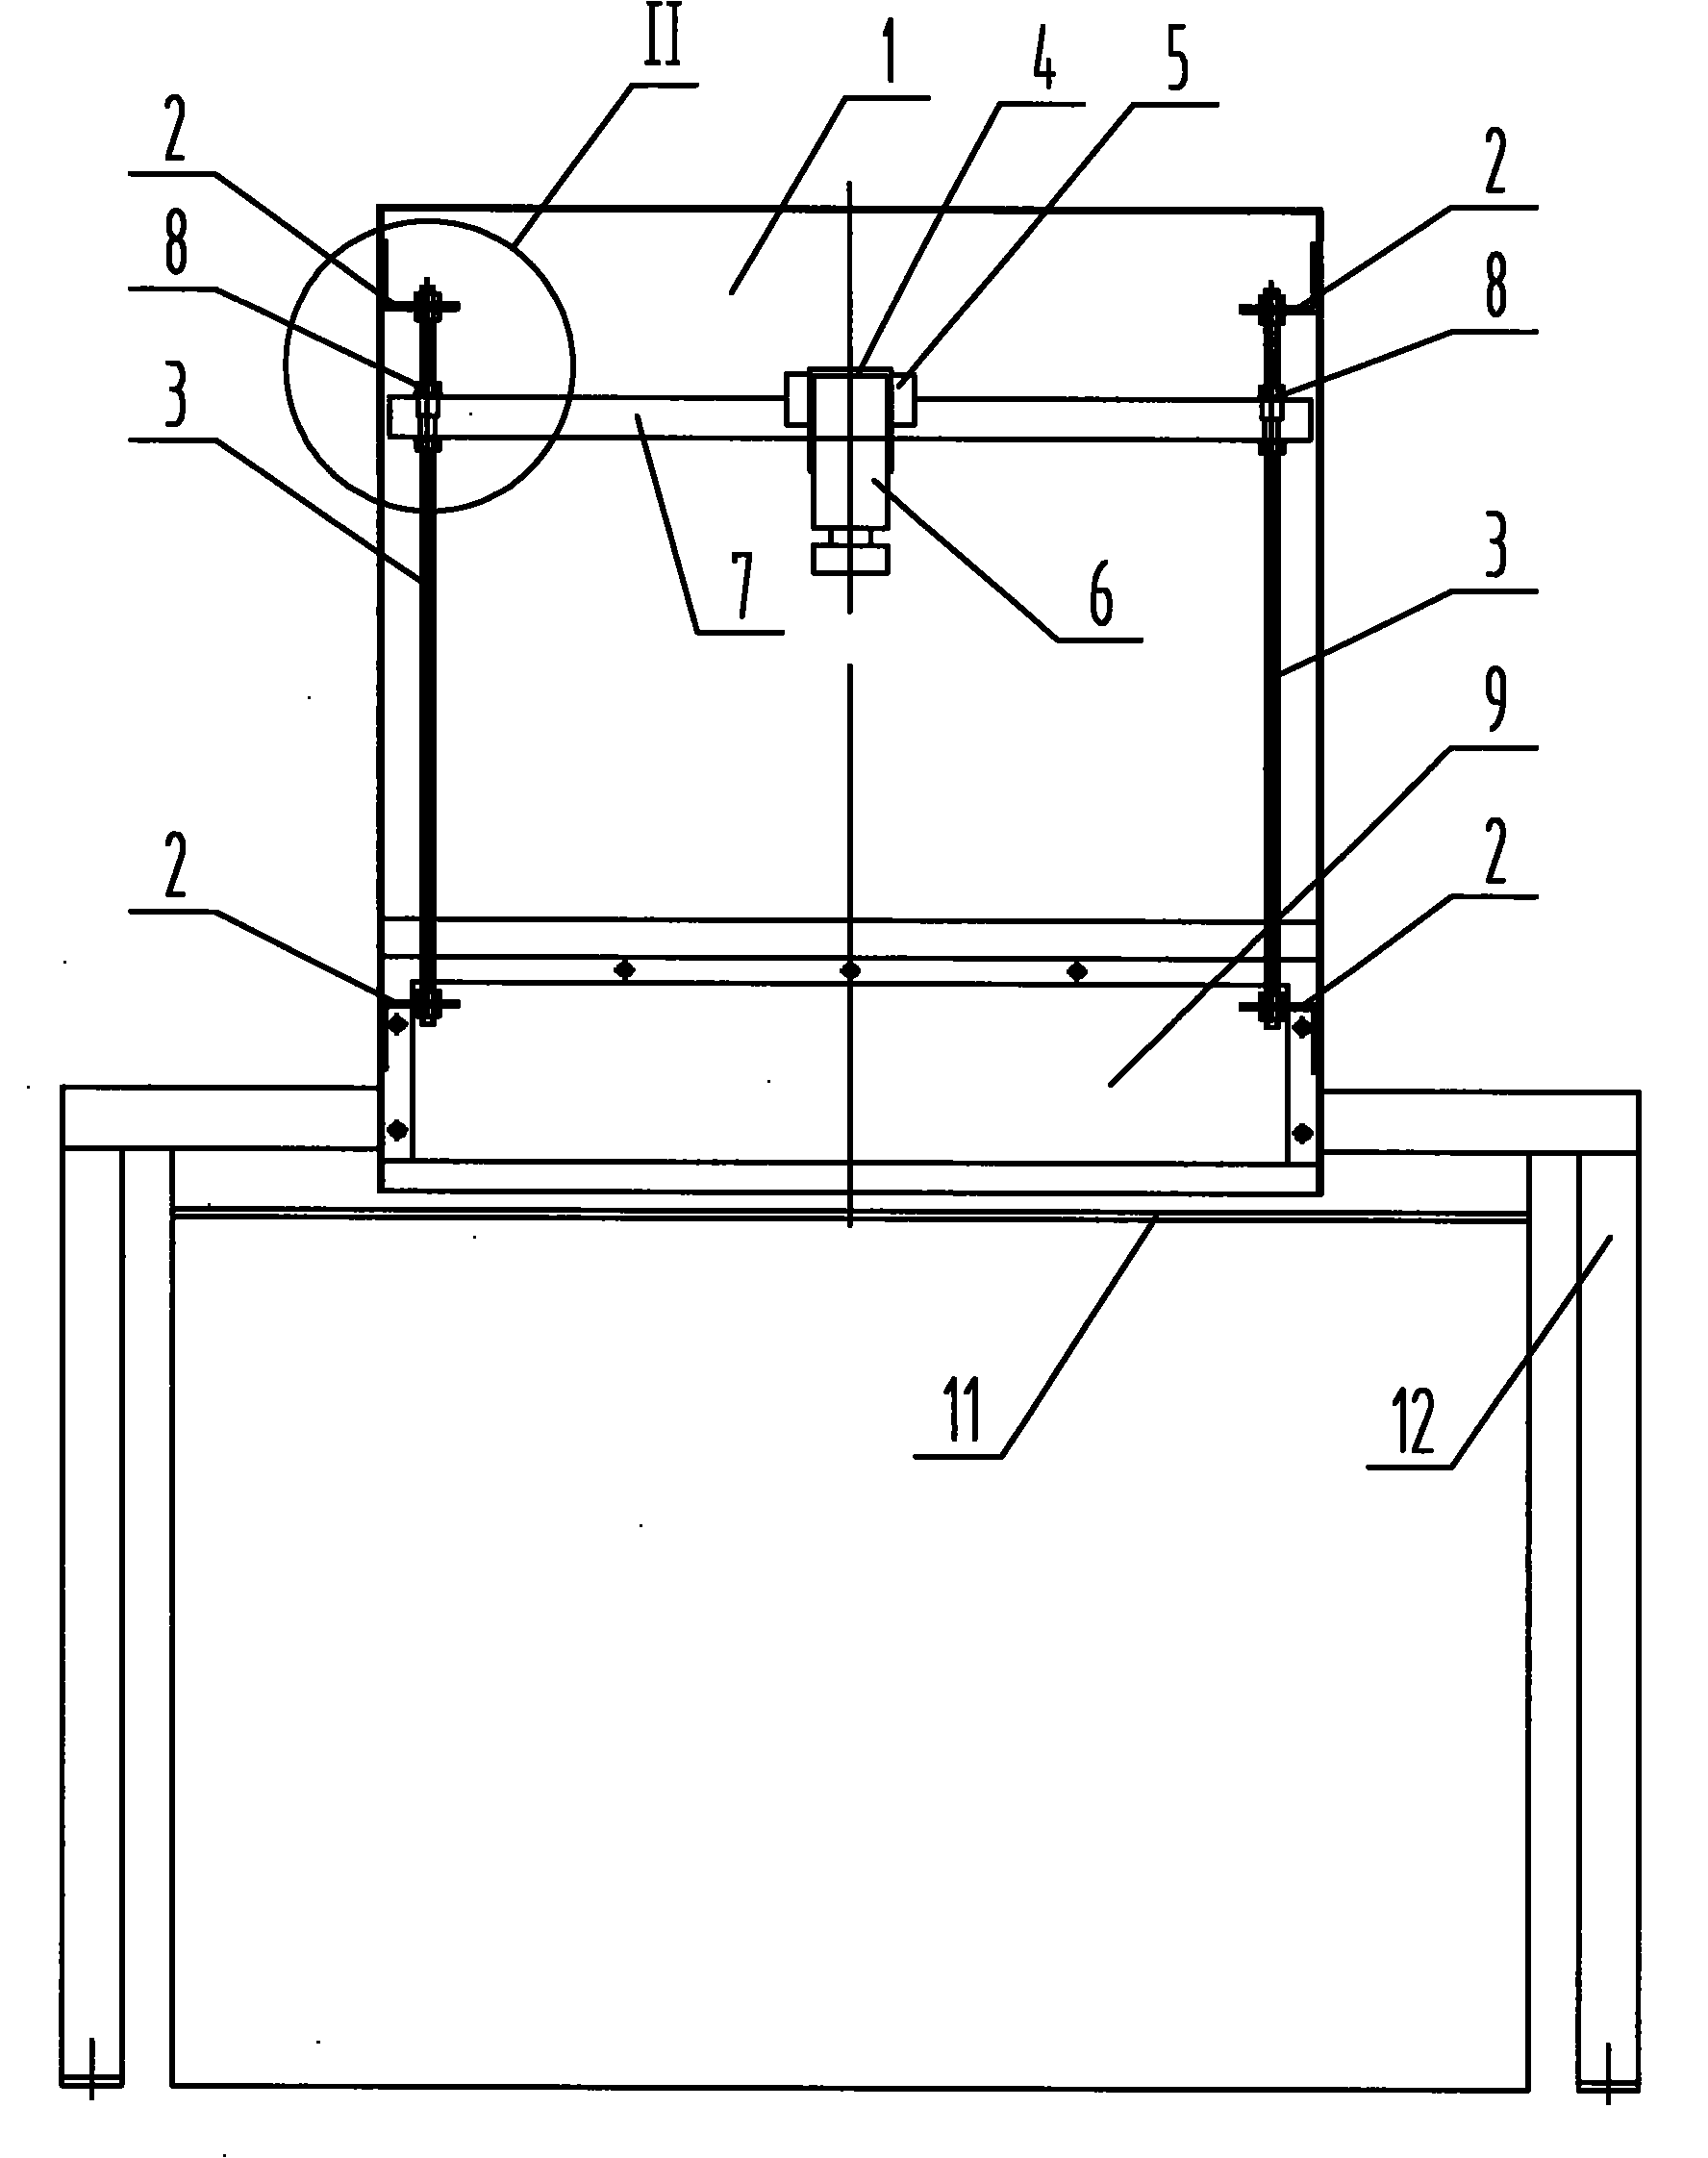 Special lighting device for seeding images